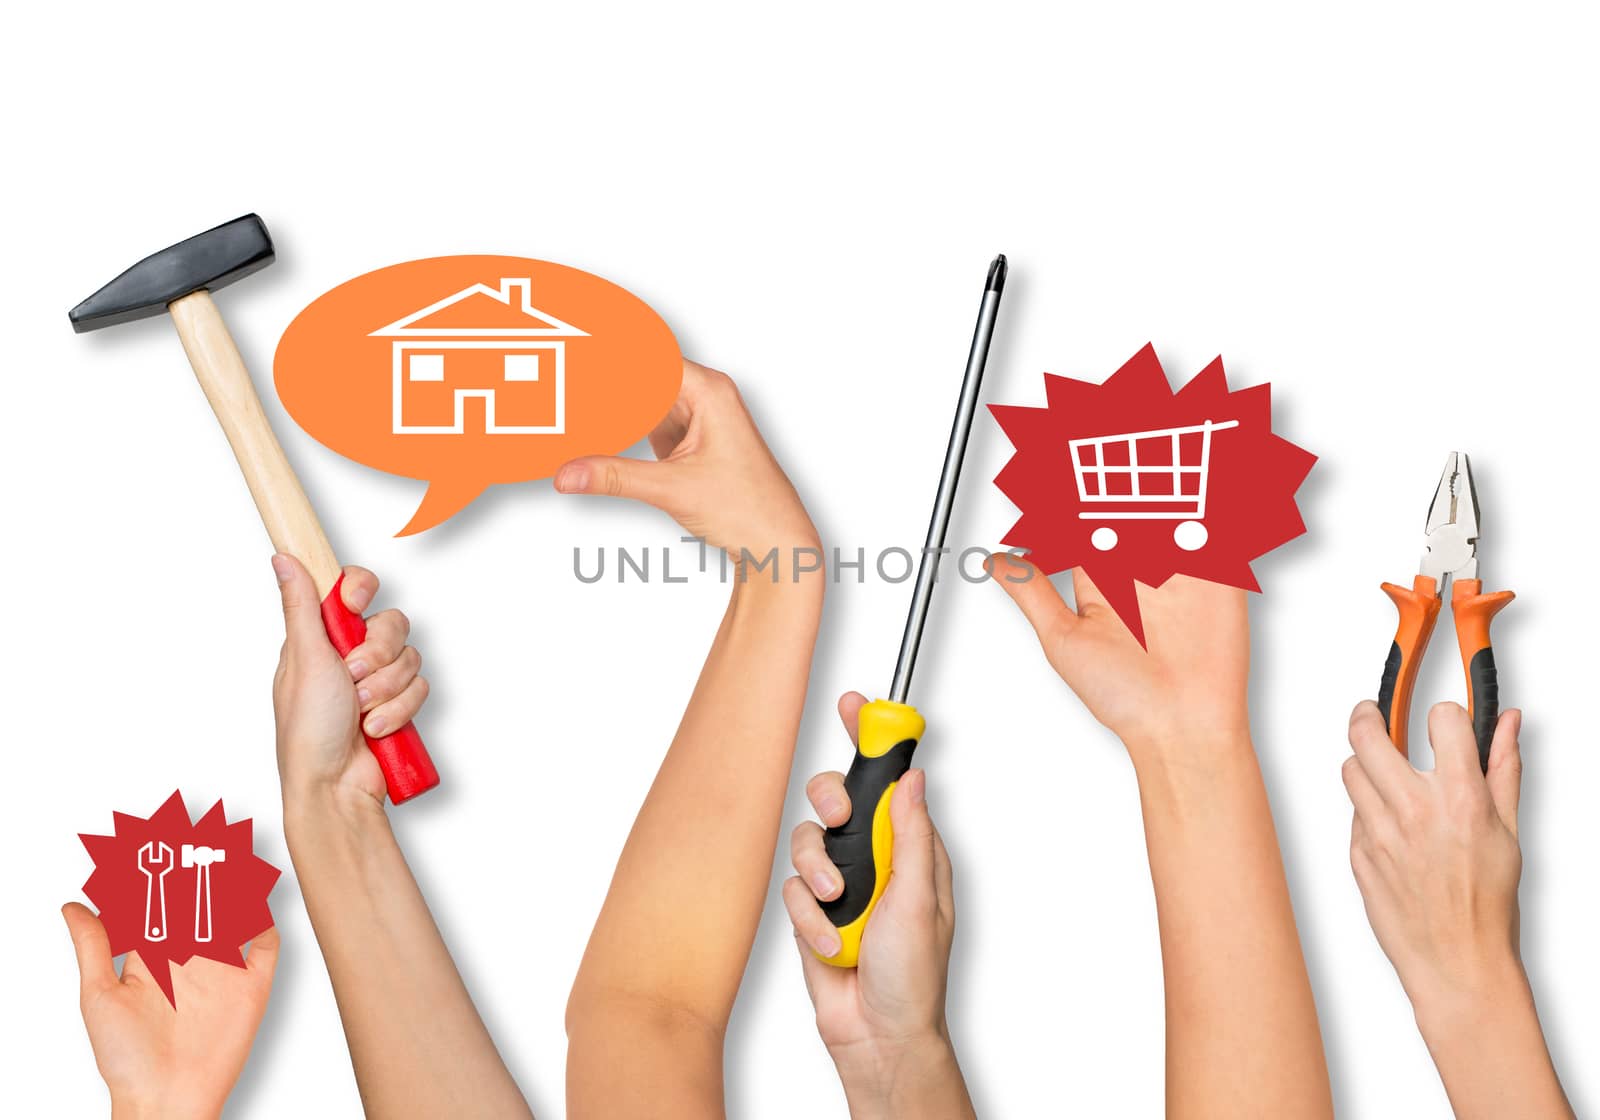 Peoples hands holding tools on isolated white background